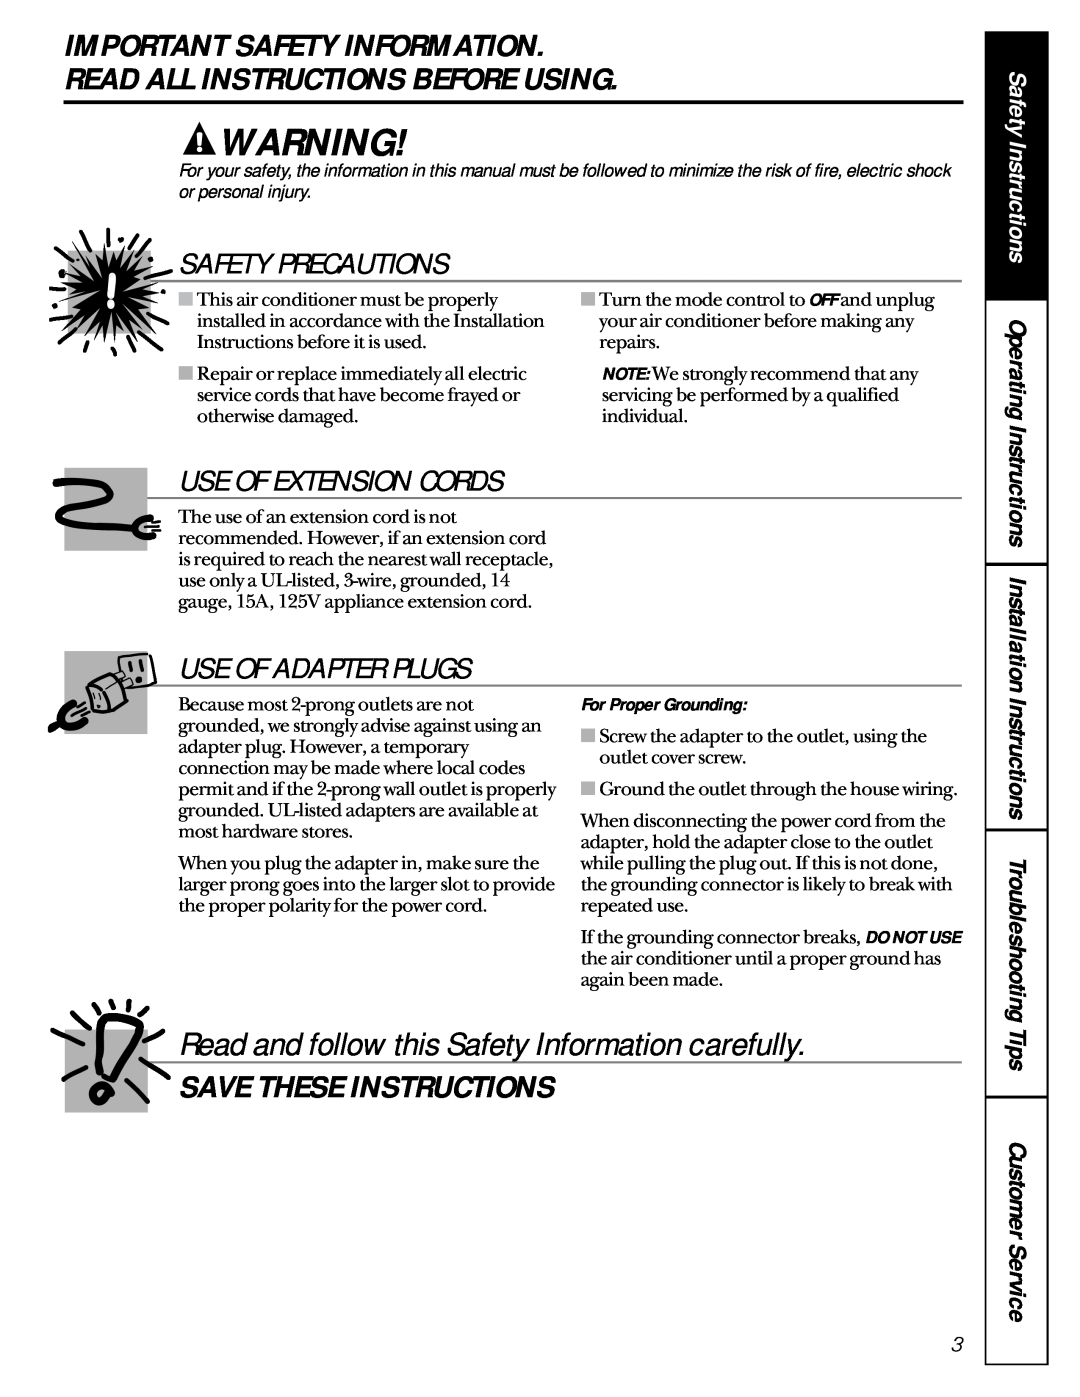 GE AMH10 Important Safety Information, Read All Instructions Before Using, Safety Precautions, Use Of Extension Cords 